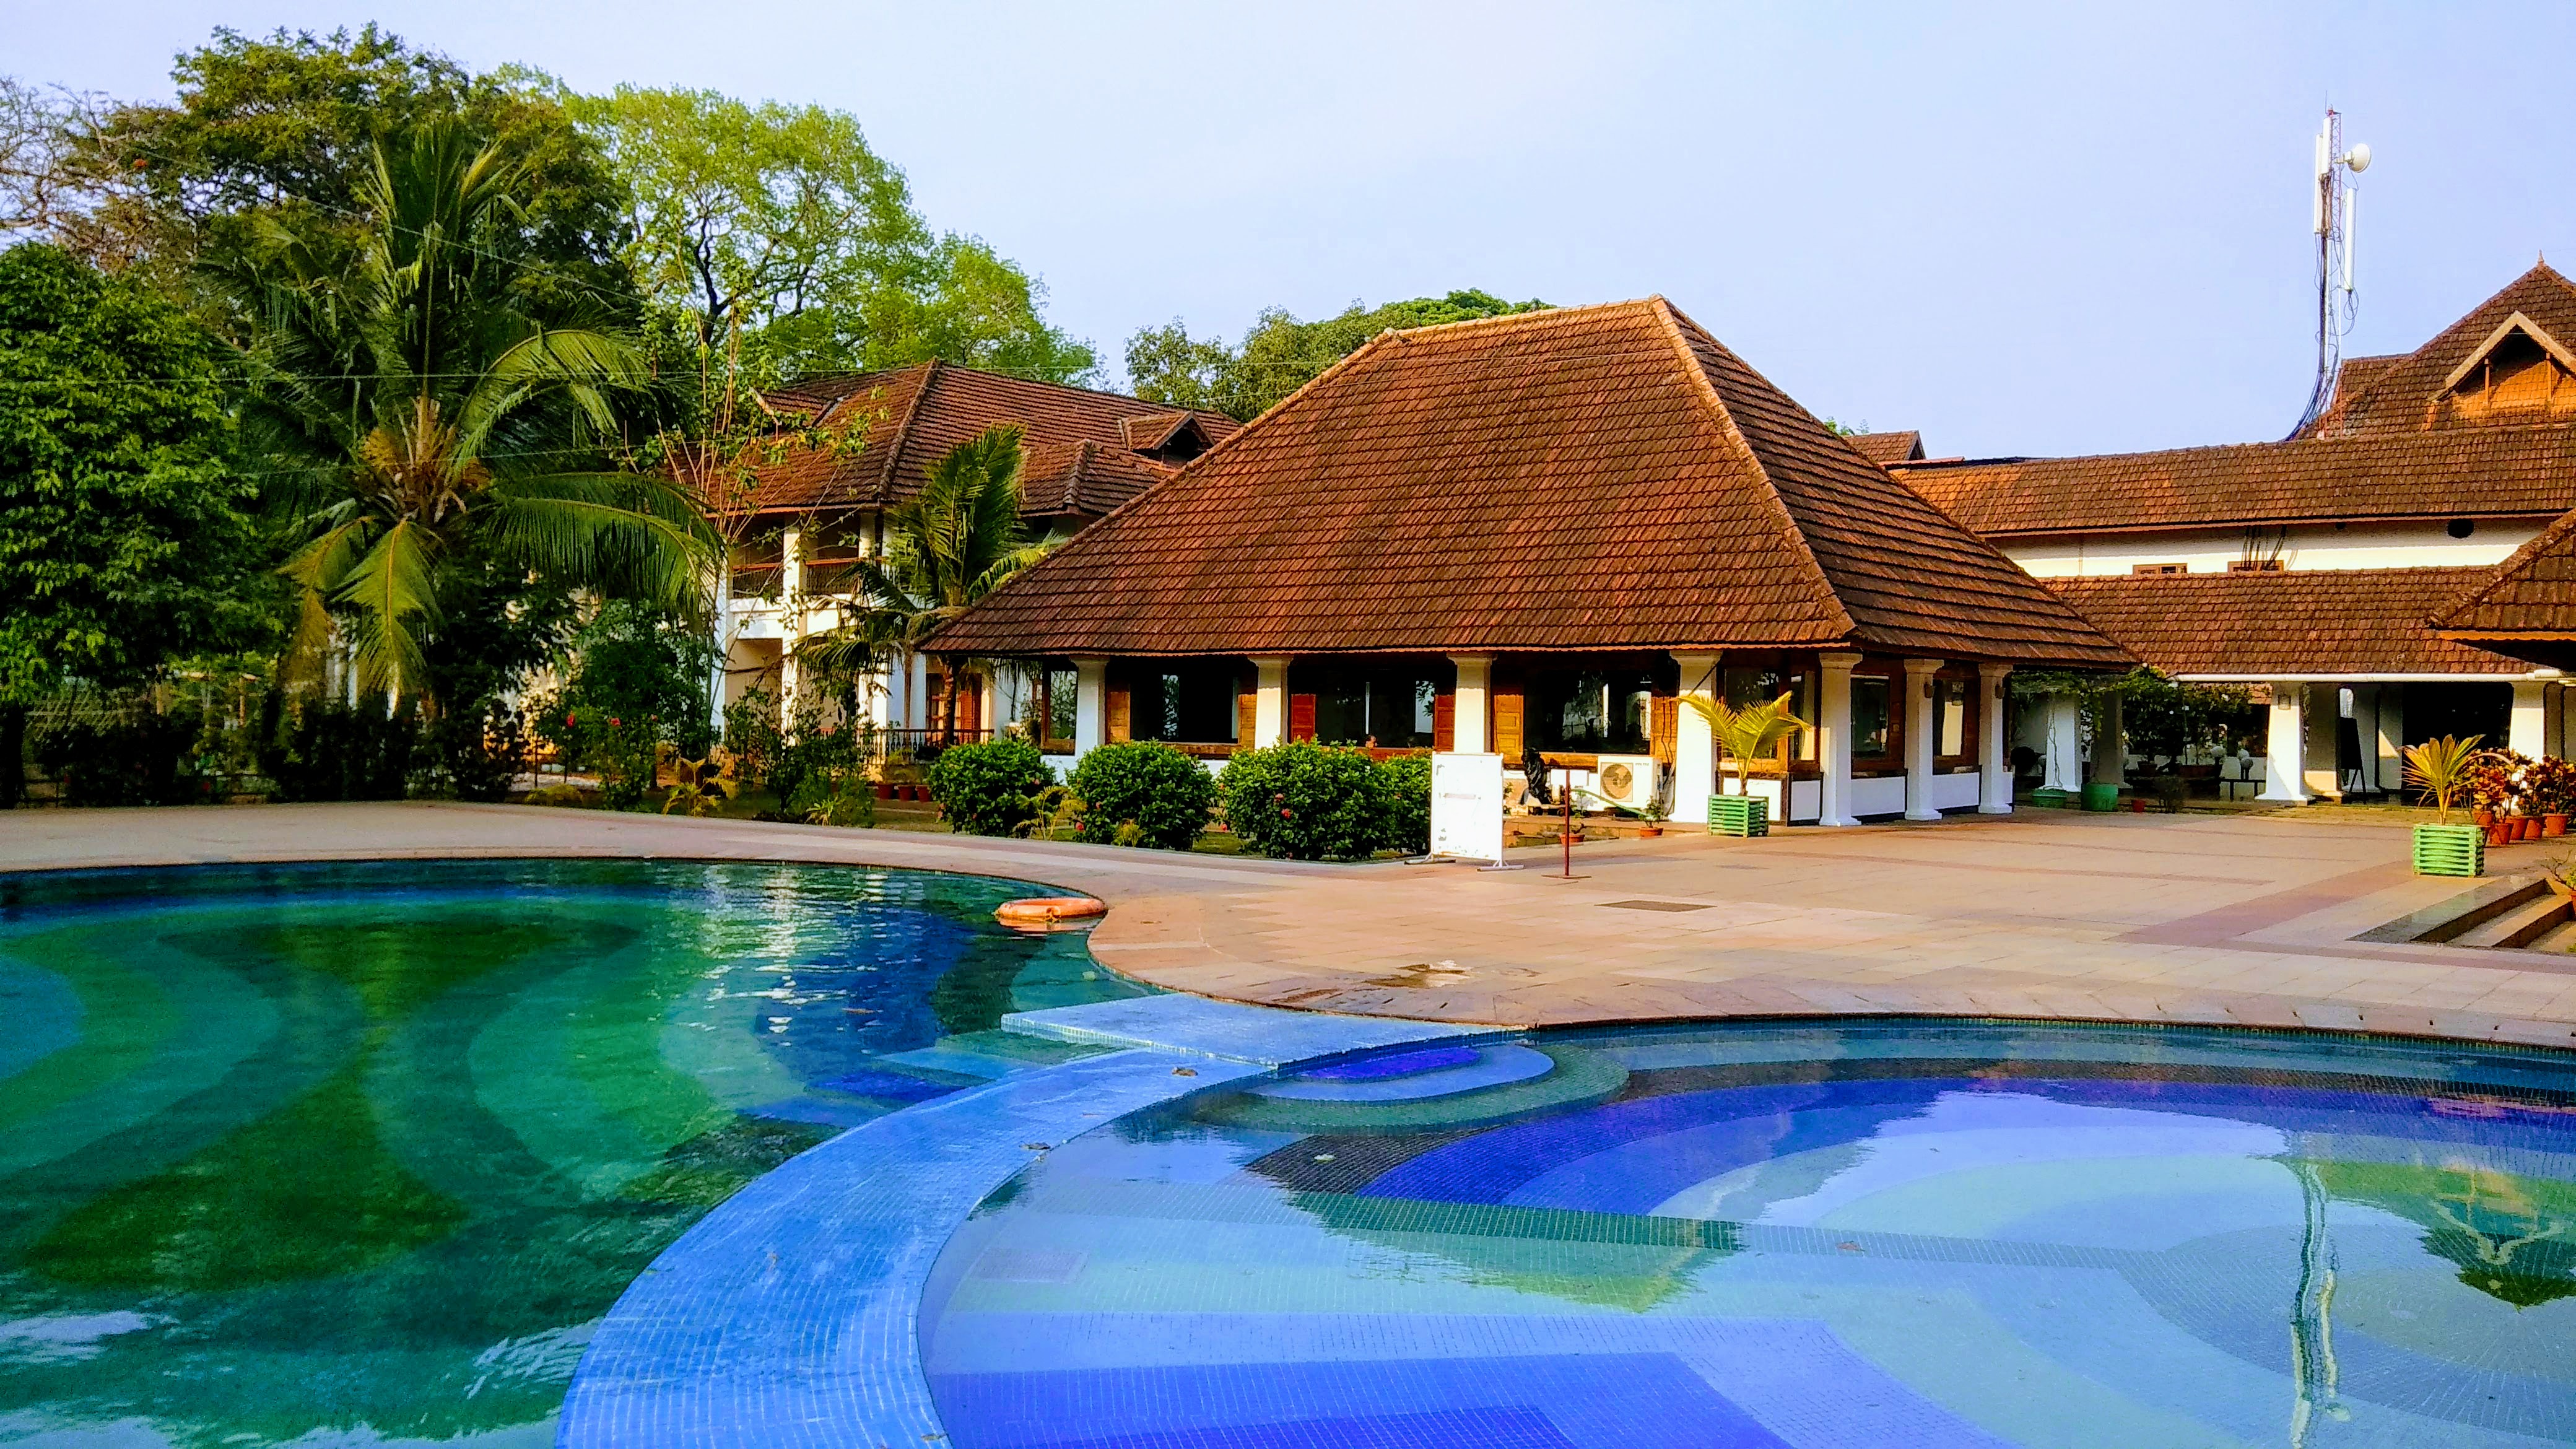 Picture of a place: Bolgatty Palace and Island Resort